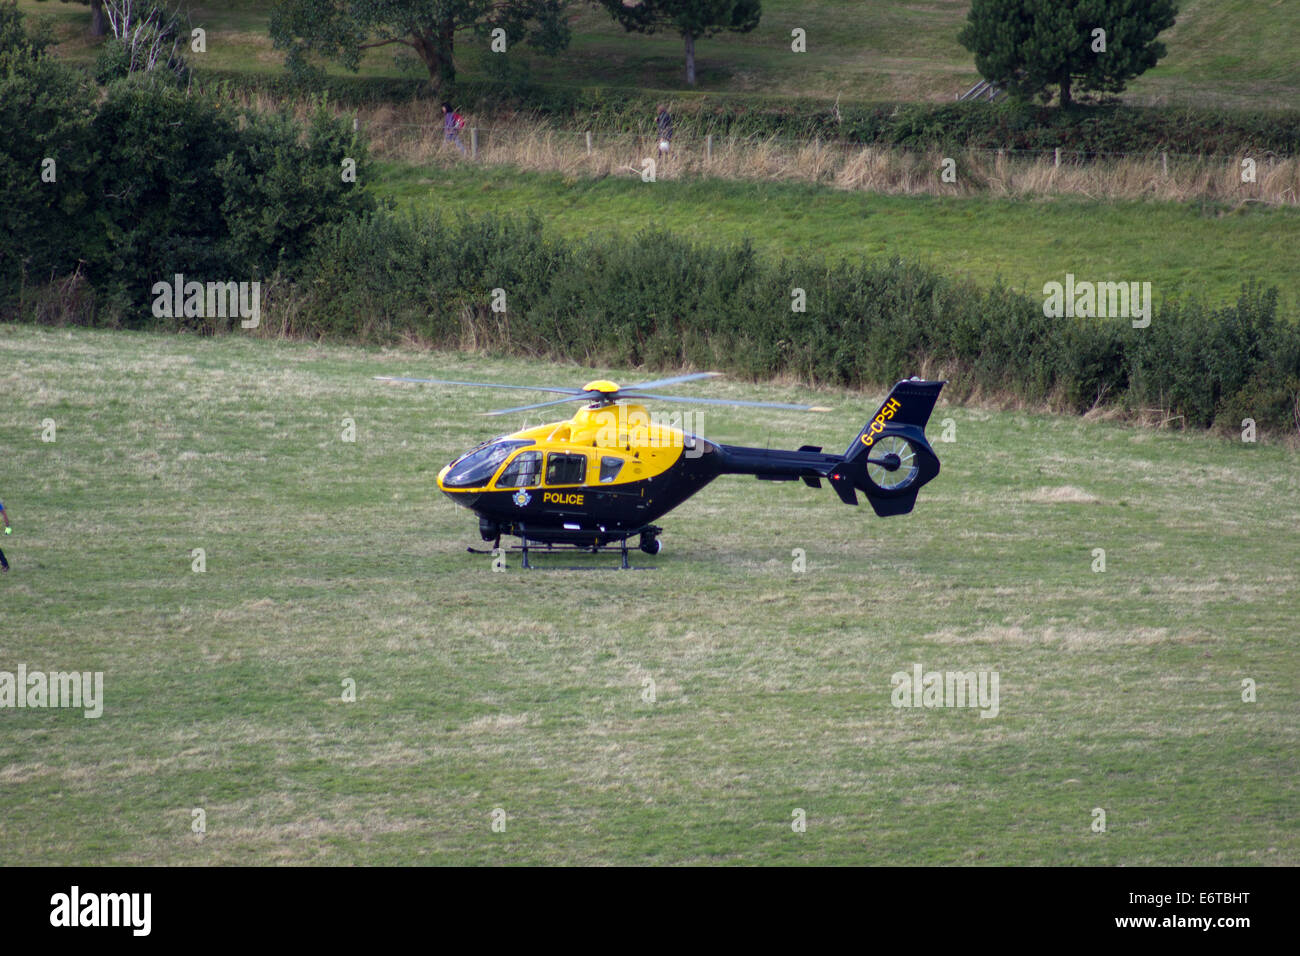 Devon and Cornwall Police helicopter Stock Photo